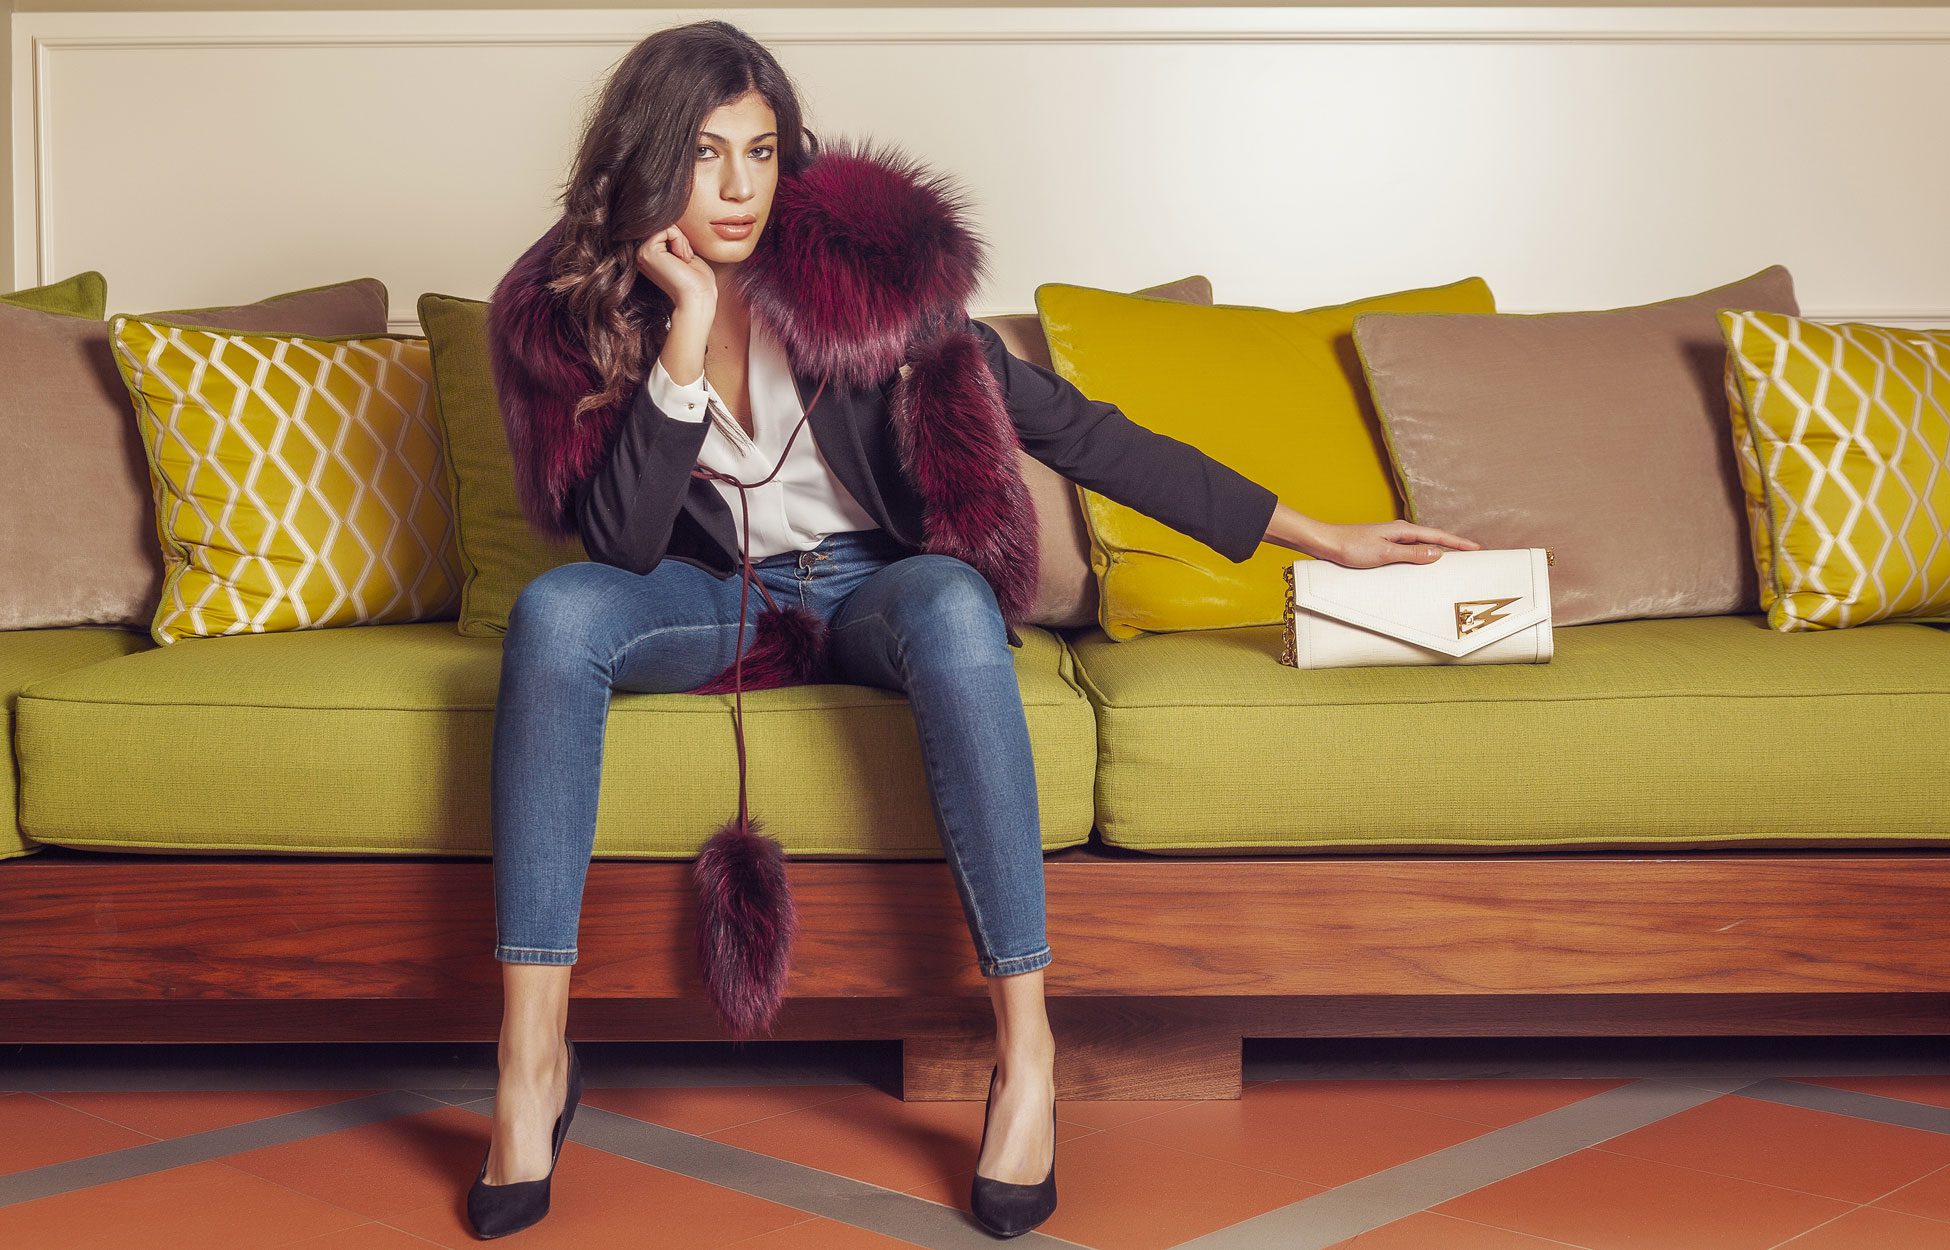 A woman sitting on the couch wearing high heels